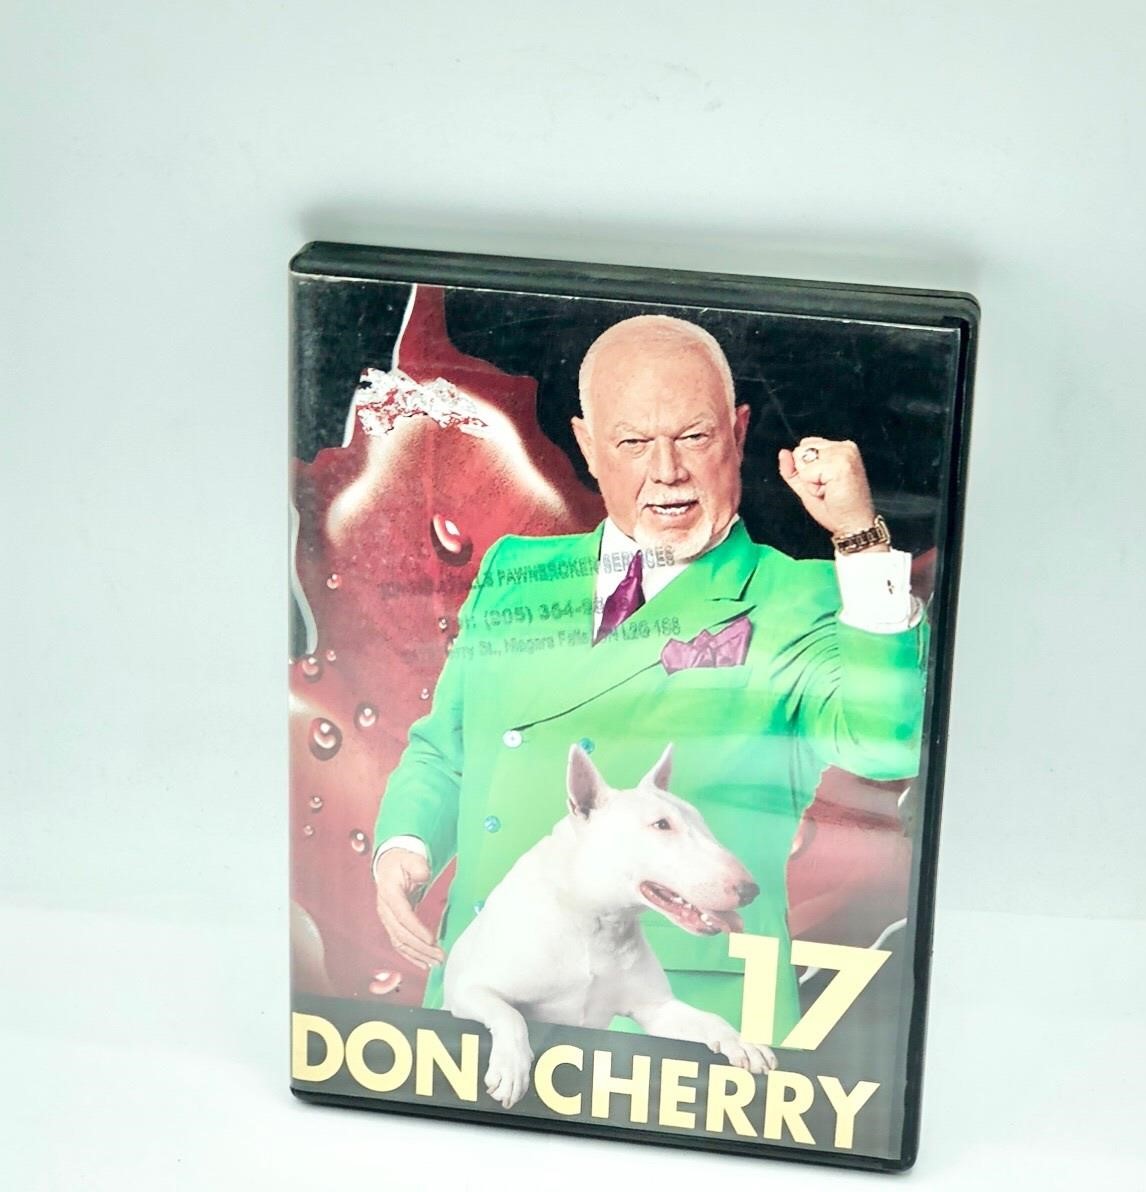 Don Cherry 17 DVD previously viewed